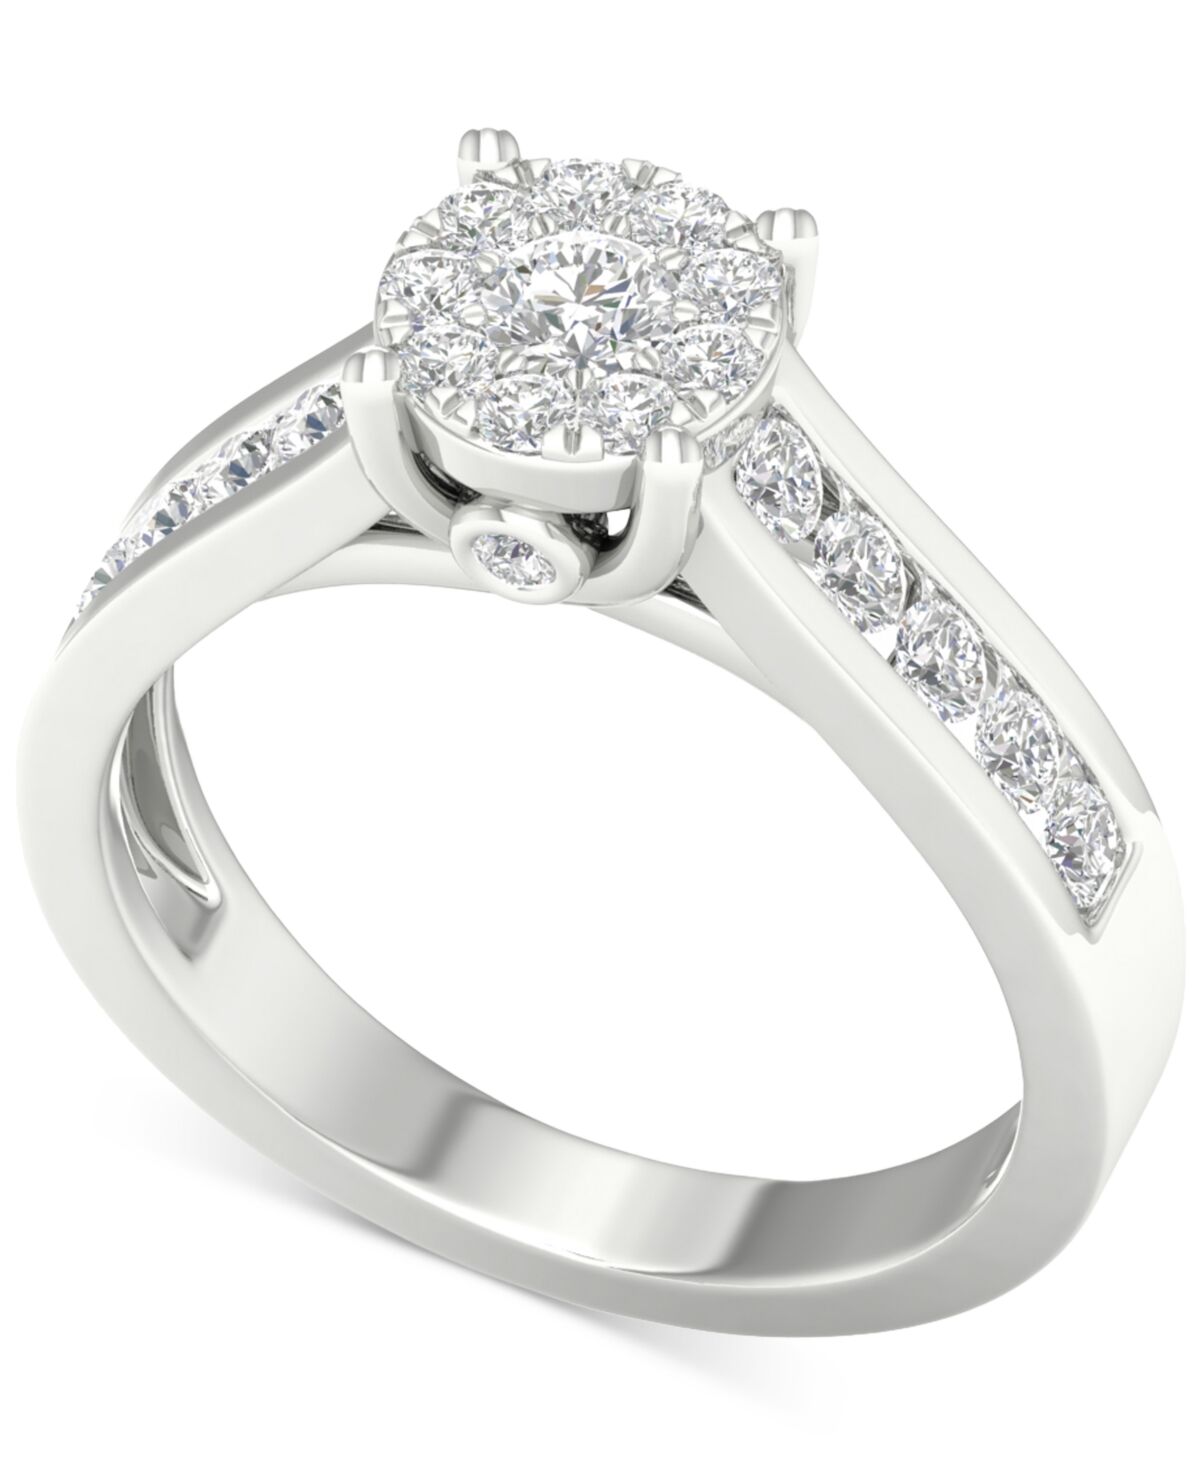 Macy's Diamond Cluster Channel-Set Engagement Ring (3/4 ct. t.w.) in 14k White Gold - White Gold